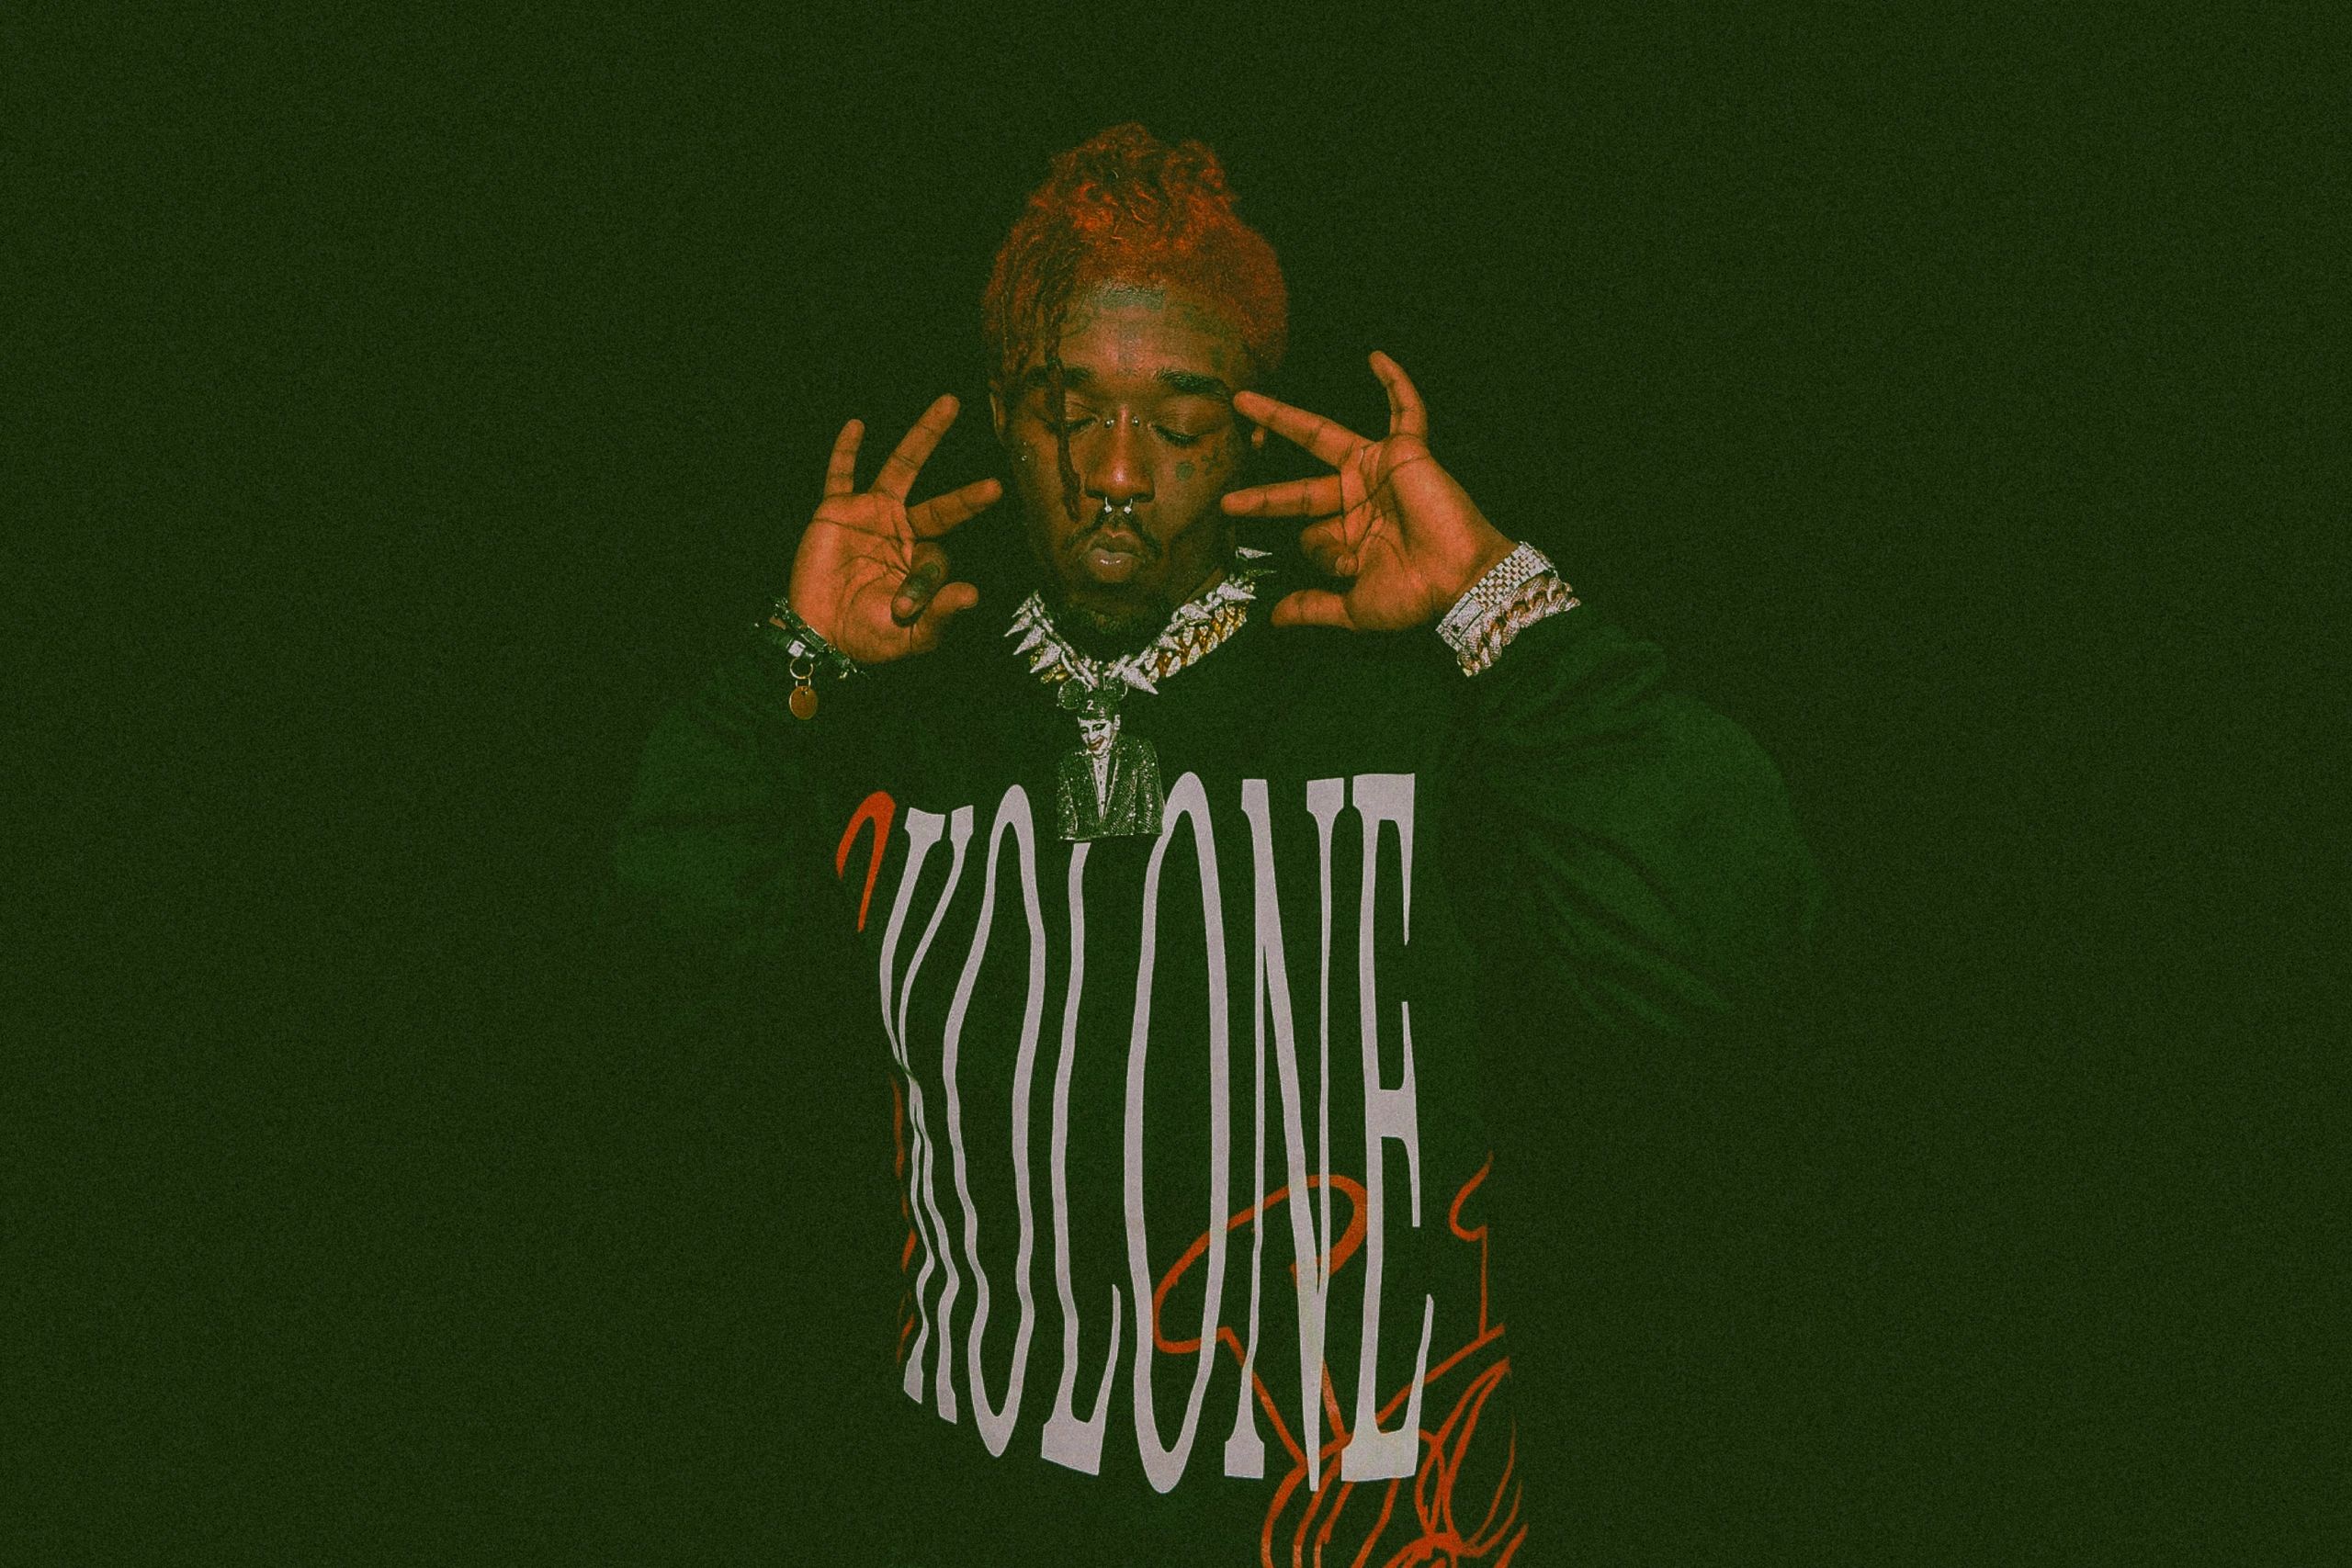 New Lil Uzi Vert song surfaces online titled "Made It"